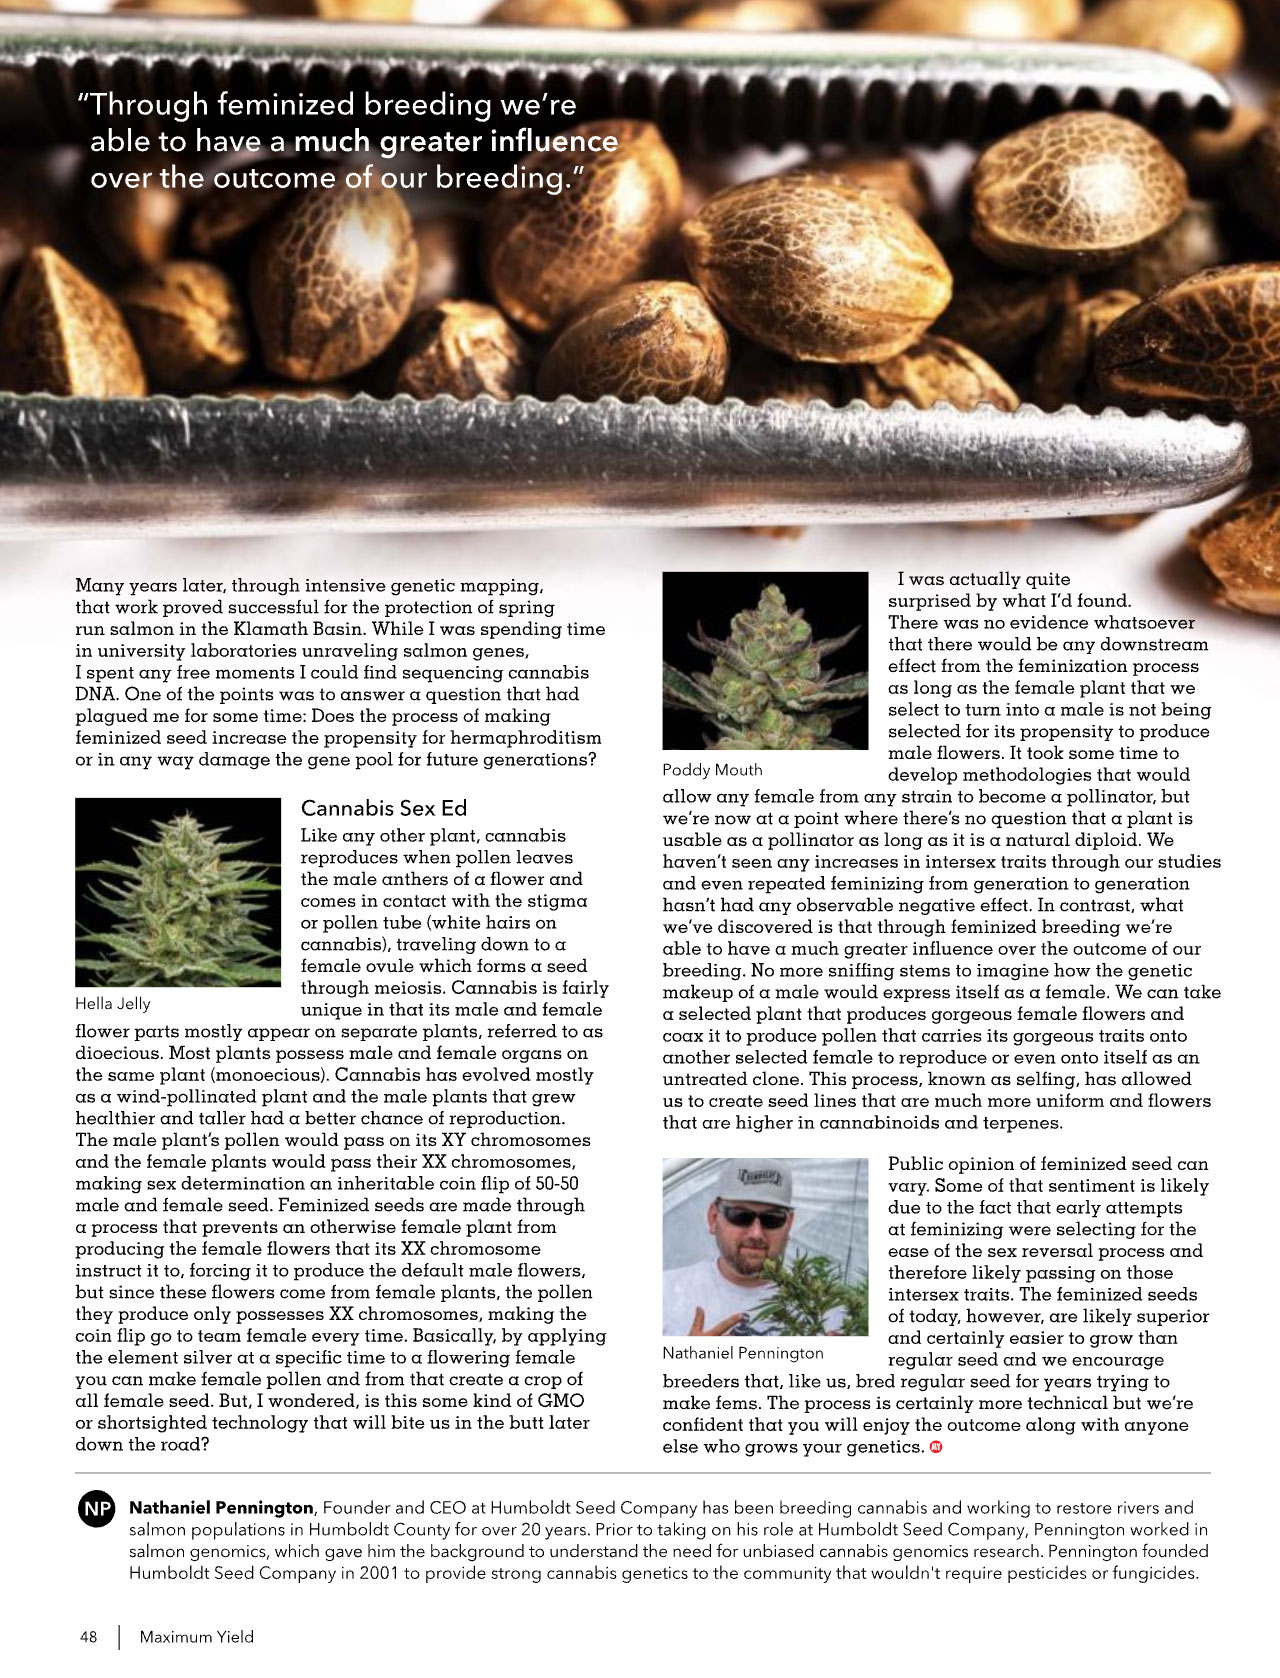 cannabis seeds in article